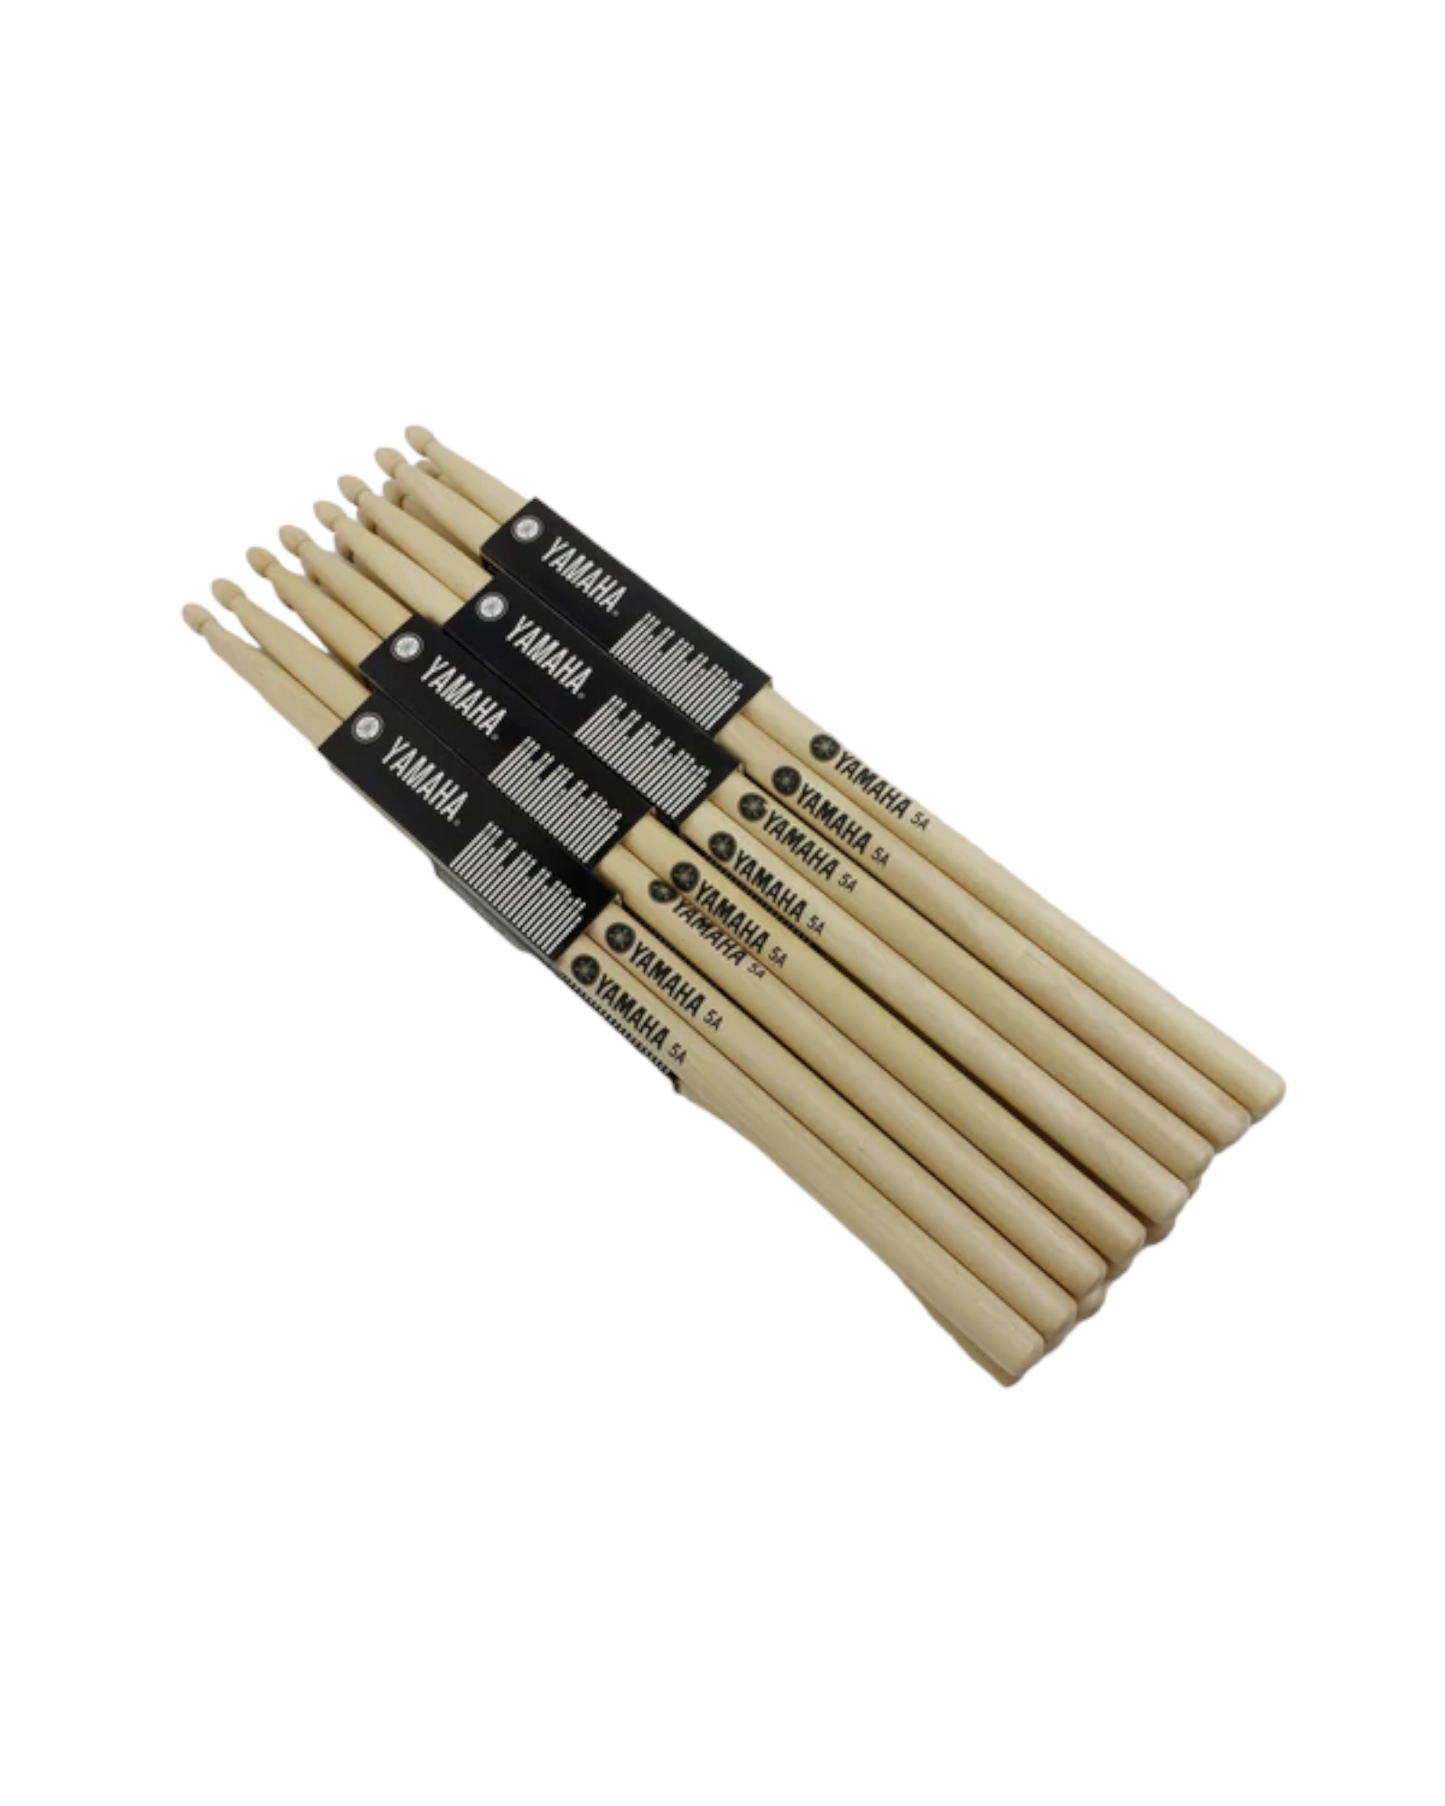 Yamaha YA5A Professional 5A Drum Sticks Maple 5 Color: Black, Green, Orange, Red, and Natural